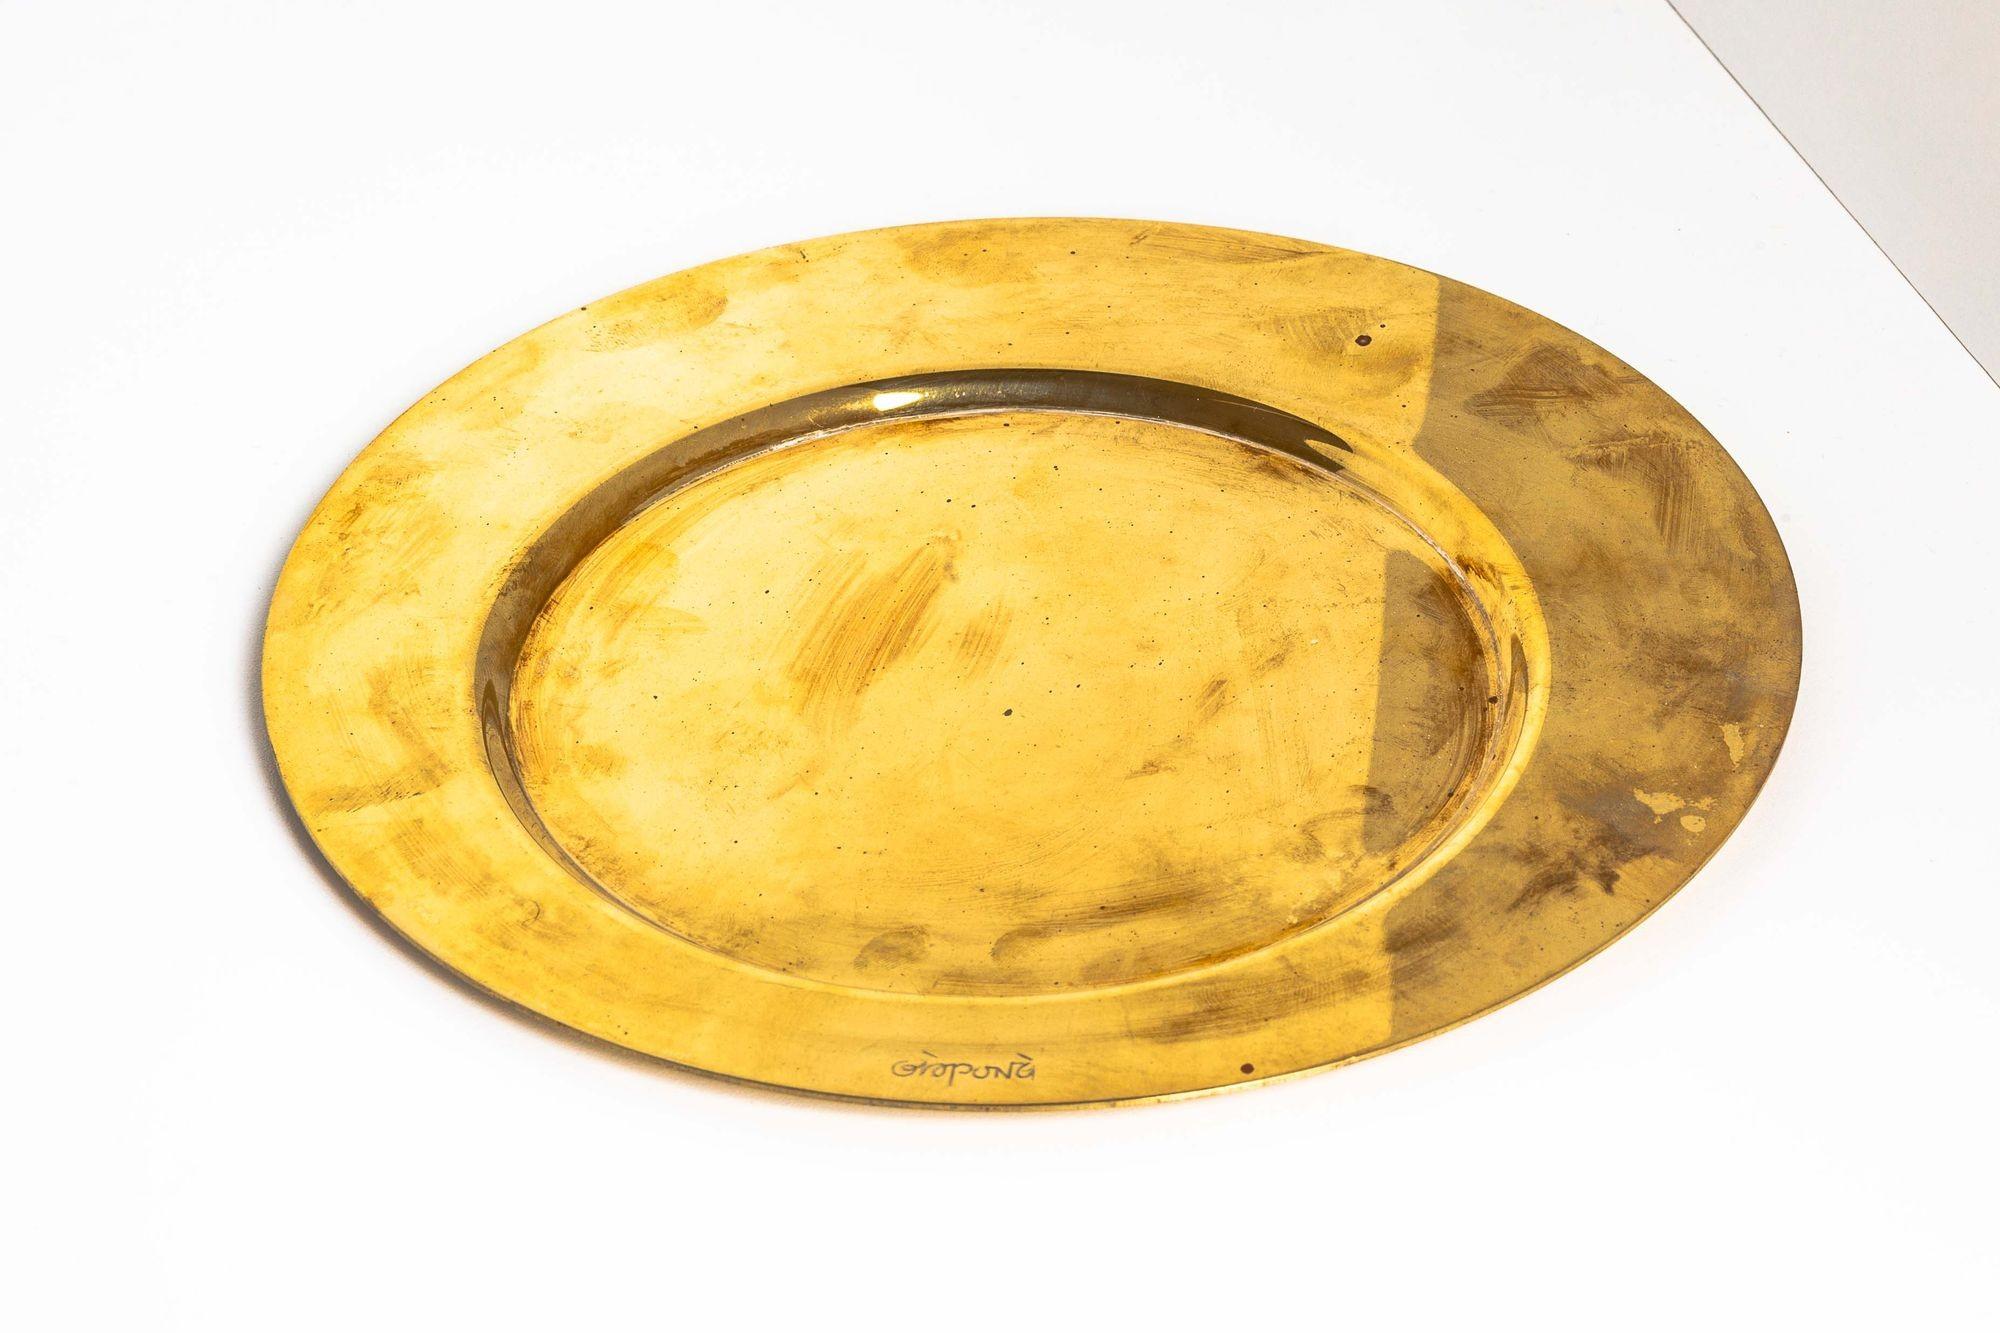 Gio Ponti Brass Plate by Cleto Munari
Impressed signature to each example 'Gio Ponti'. Impressed manufacturer's mark to verso of one example ‘Cleto Munari Forme Contemporanee Brass Plate Impressed manufacturer's mark to verso.